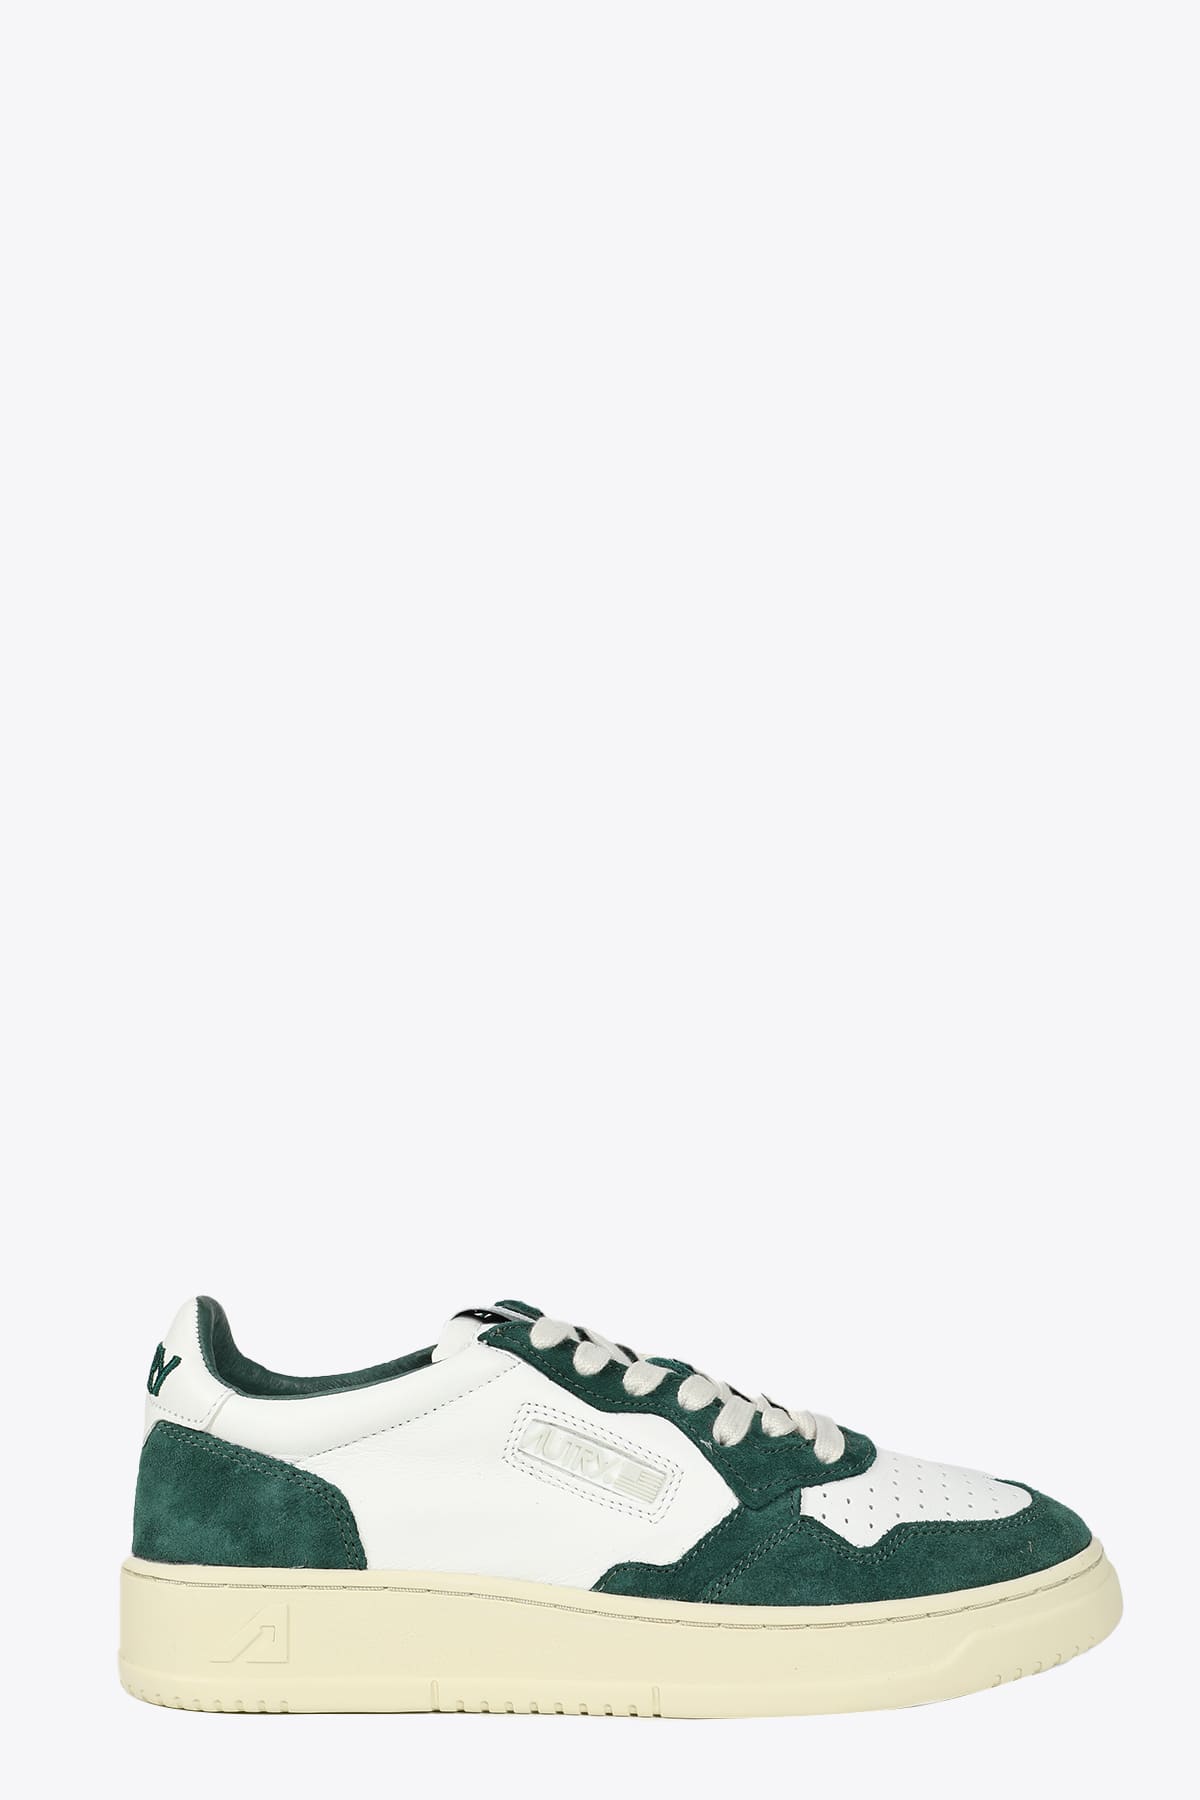 Autry Open Low Man Su/mesh White and green leather low-top lace up sneakers - Medalist